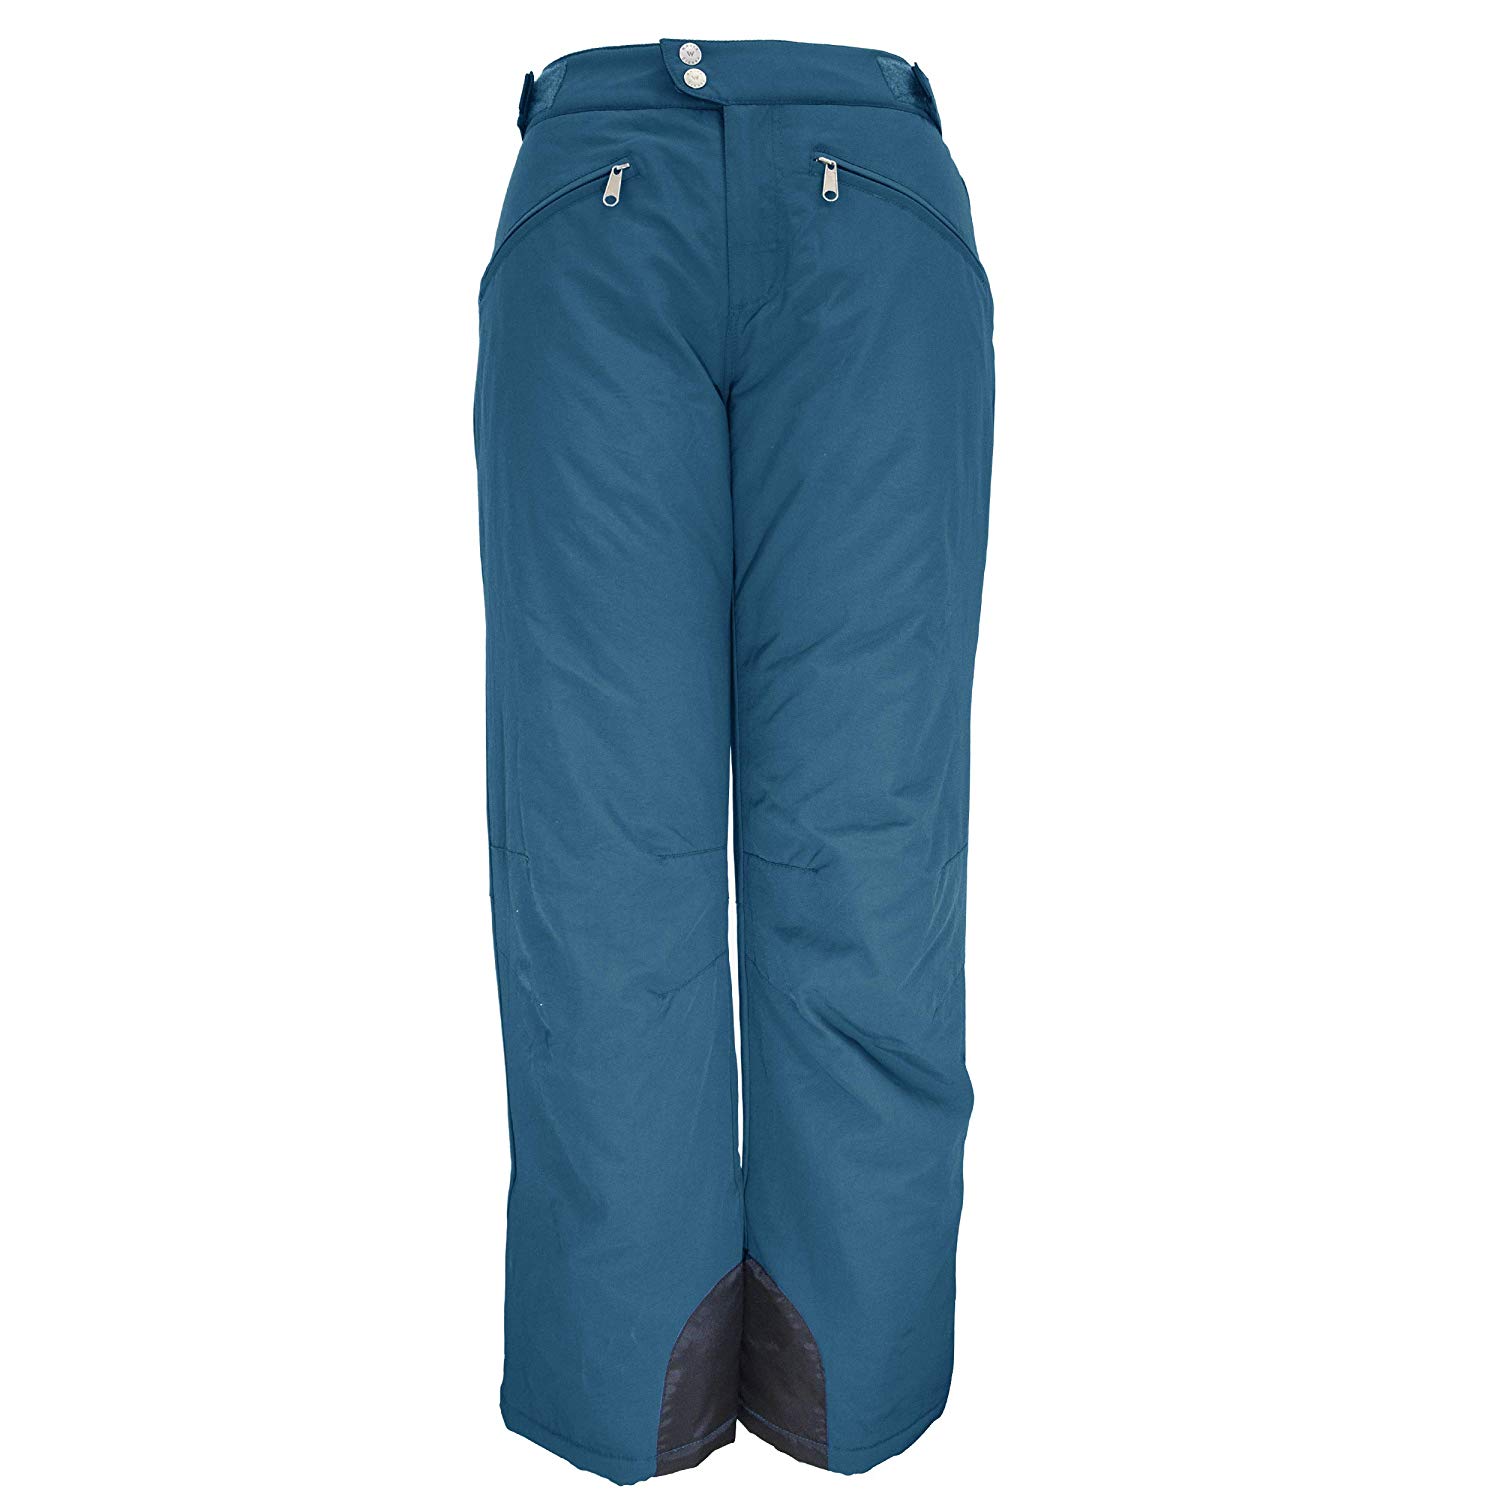 Top 10 Best Men's Insulated Pants for Winter - Top Value Reviews